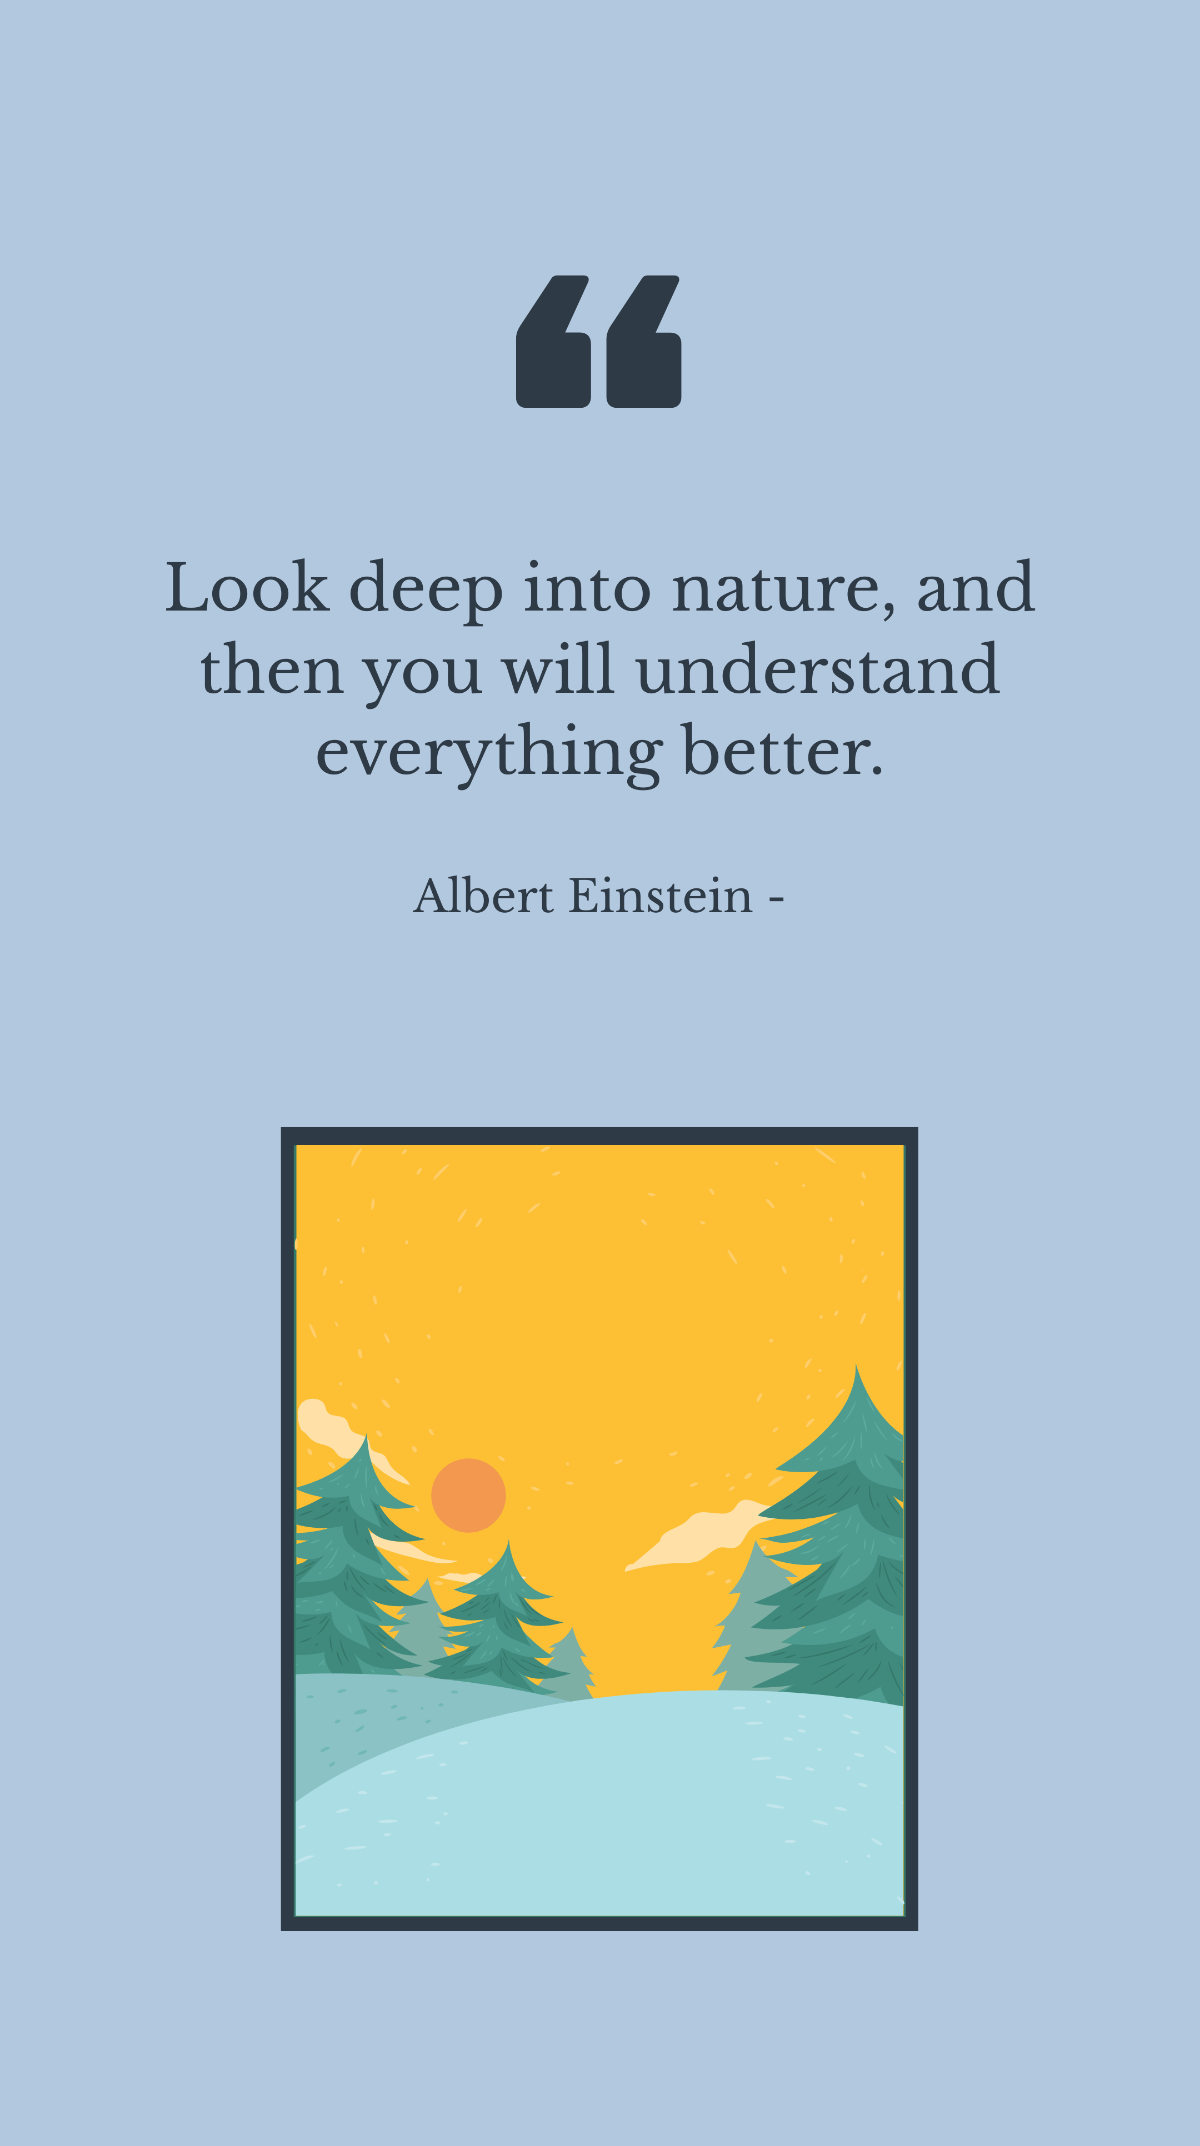 Free Albert Einstein - Look deep into nature, and then you will understand everything better. Template